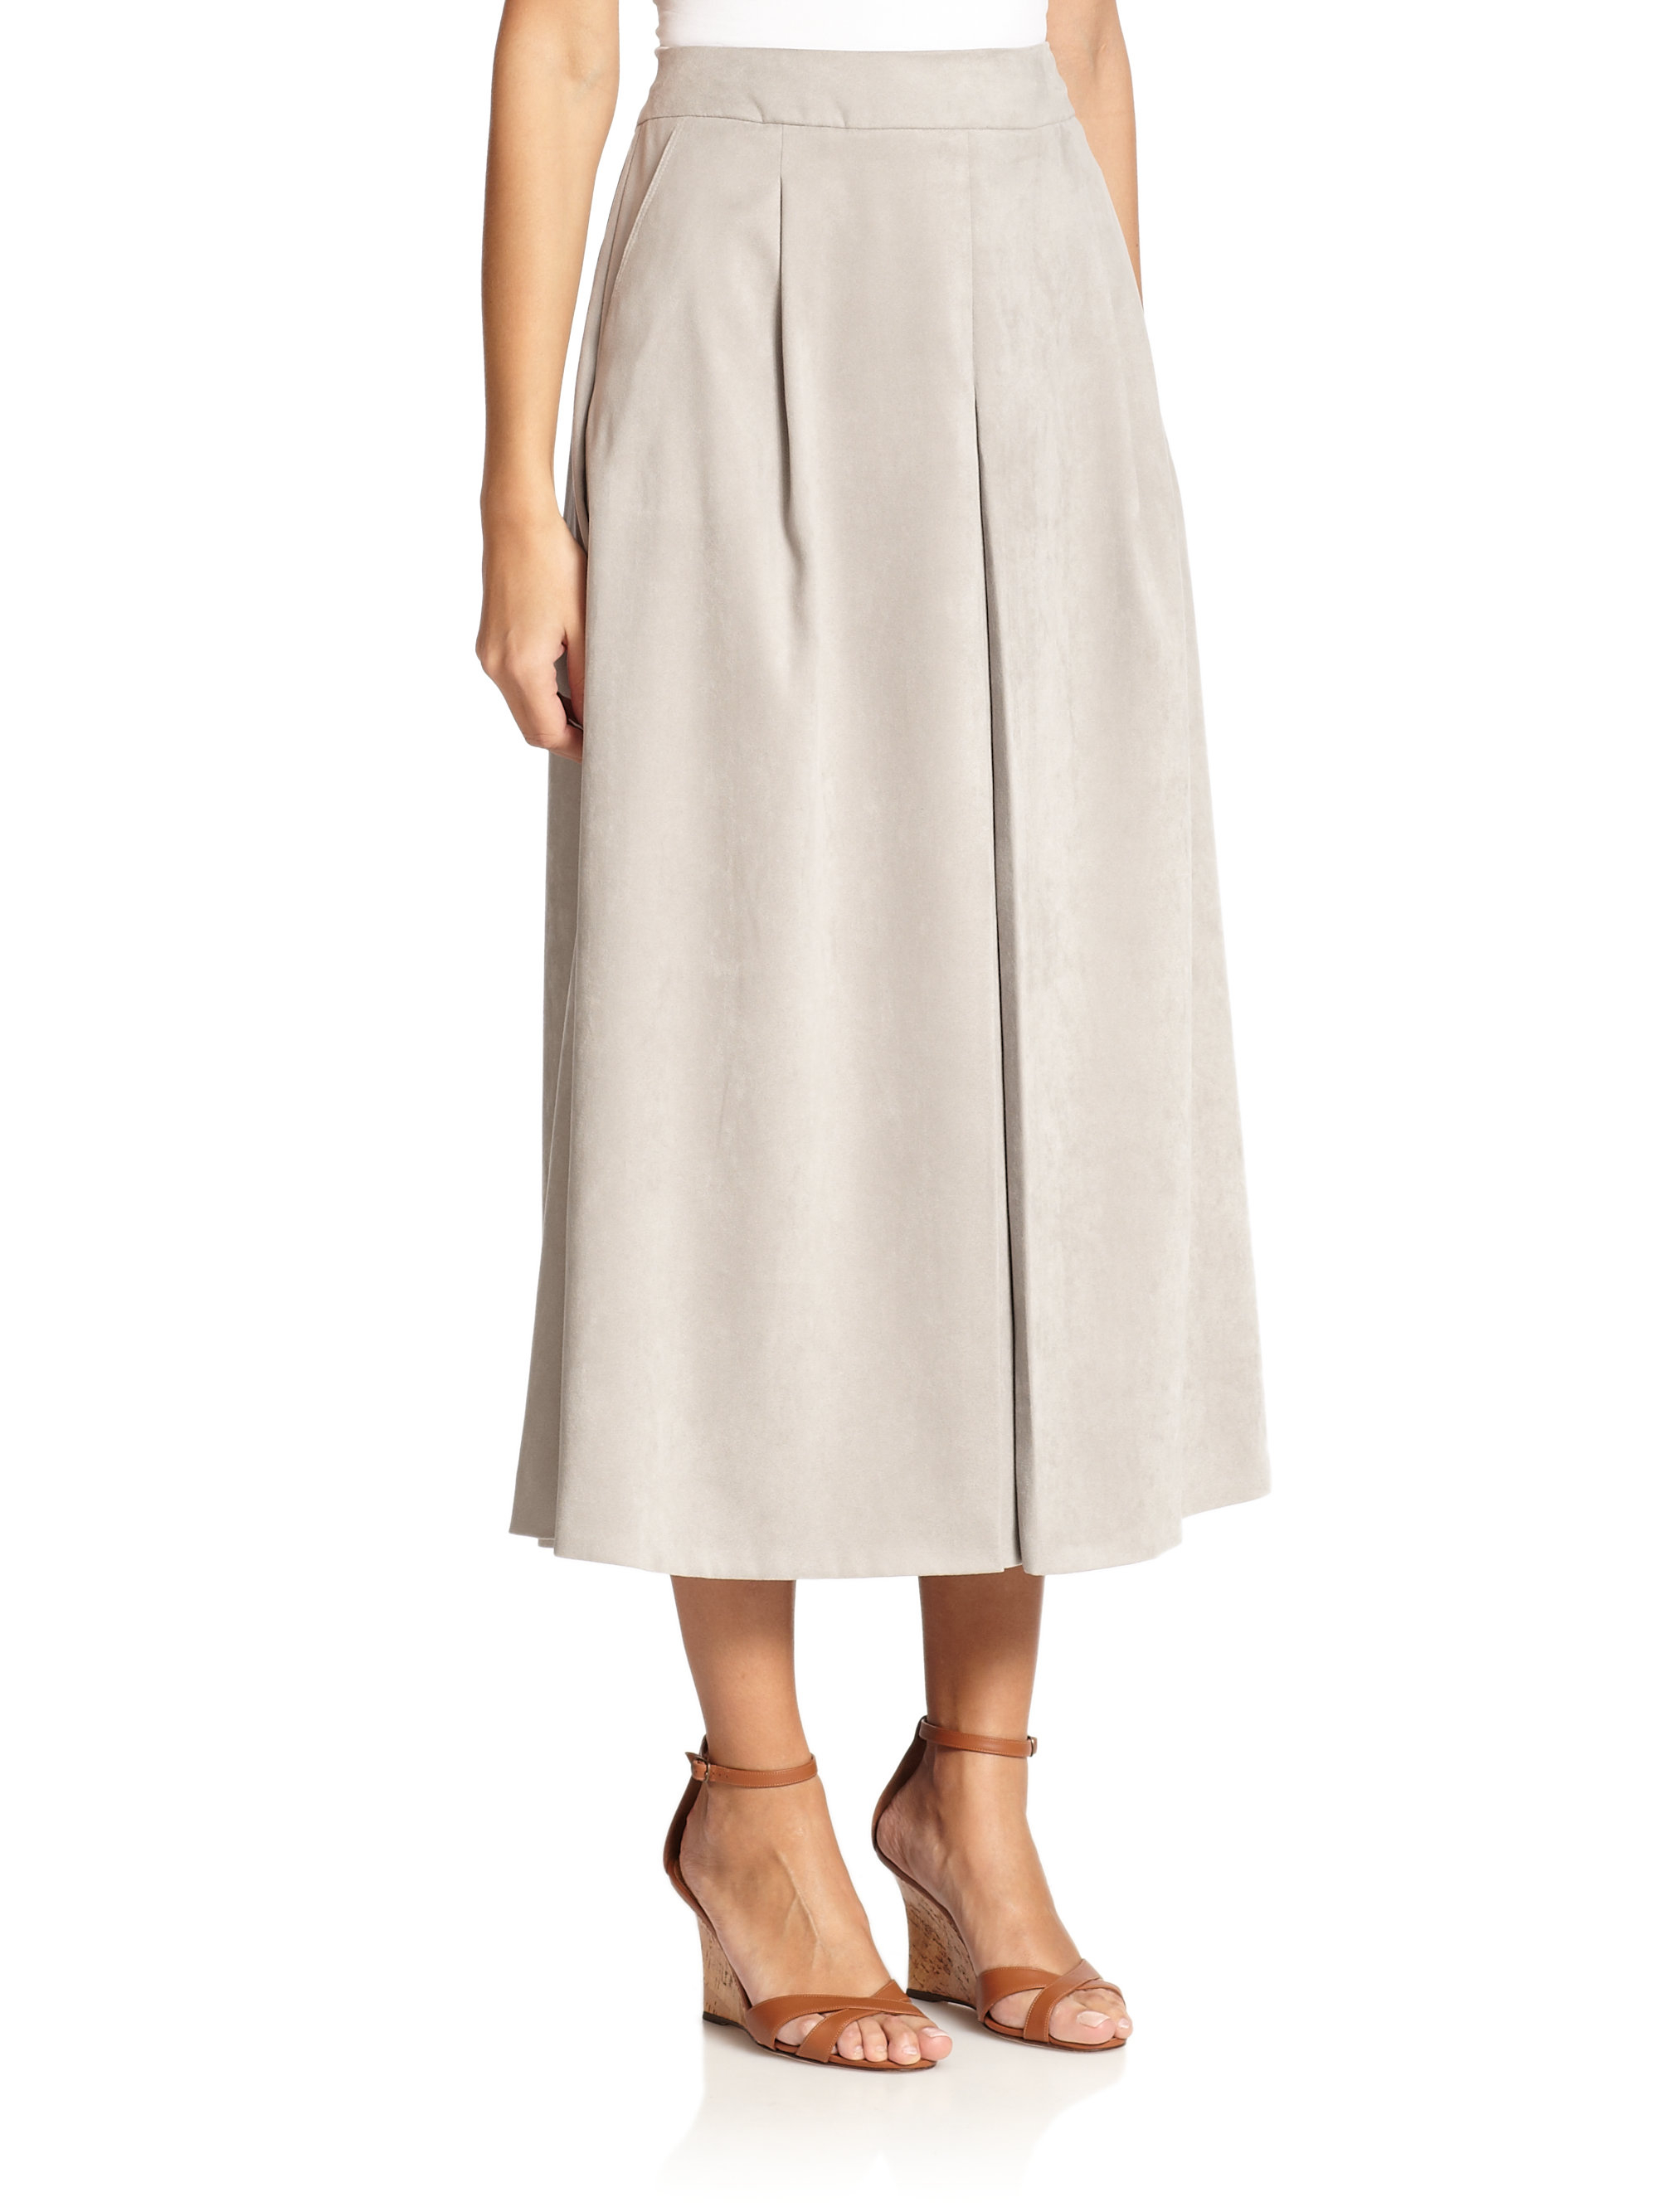 Max mara Giove Faux Suede Midi Skirt in Natural | Lyst